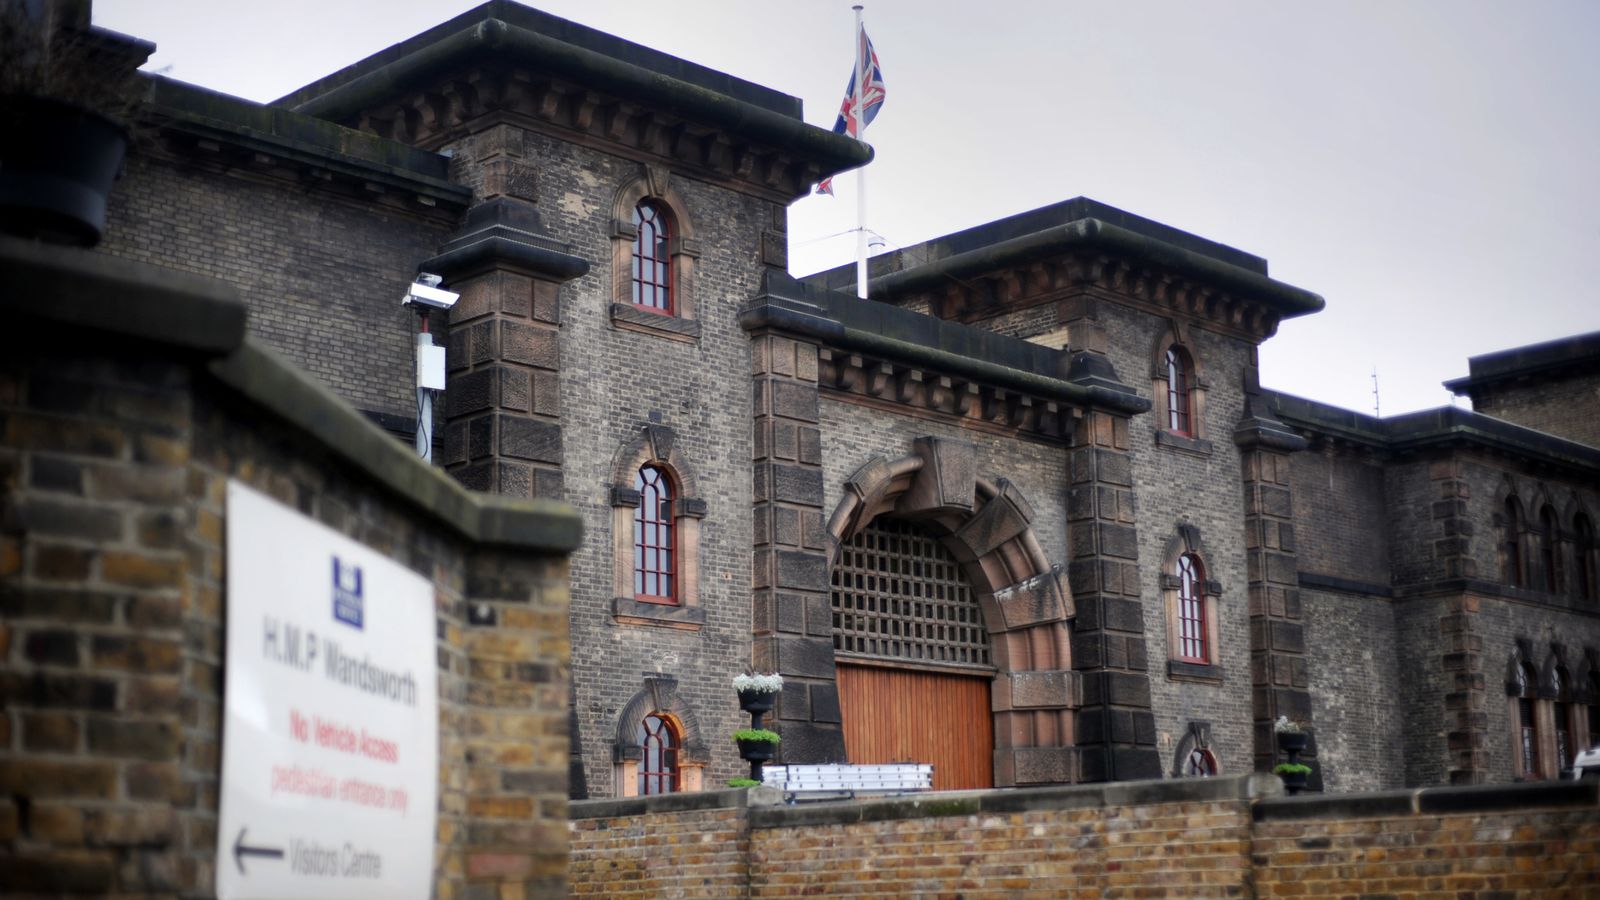 Inmate in critical condition after HMP Wandsworth stabbing | UK News